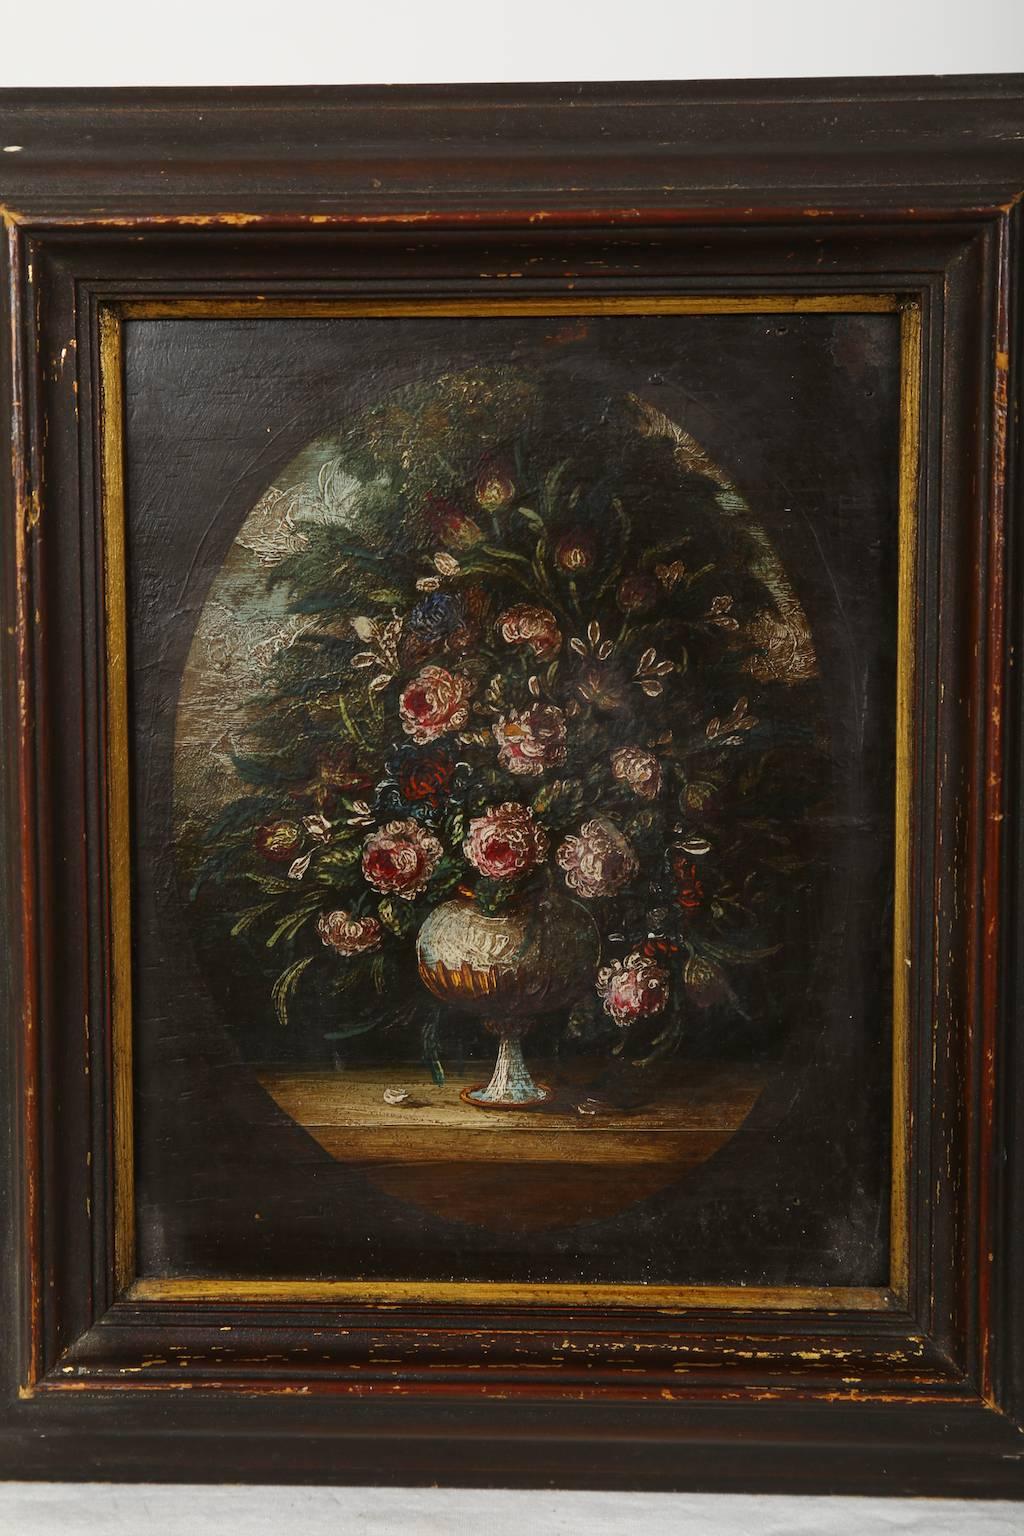 Two framed paintings, similar still lifes. Floral motive, most likely Italian, late 19th century. Oil on panel.